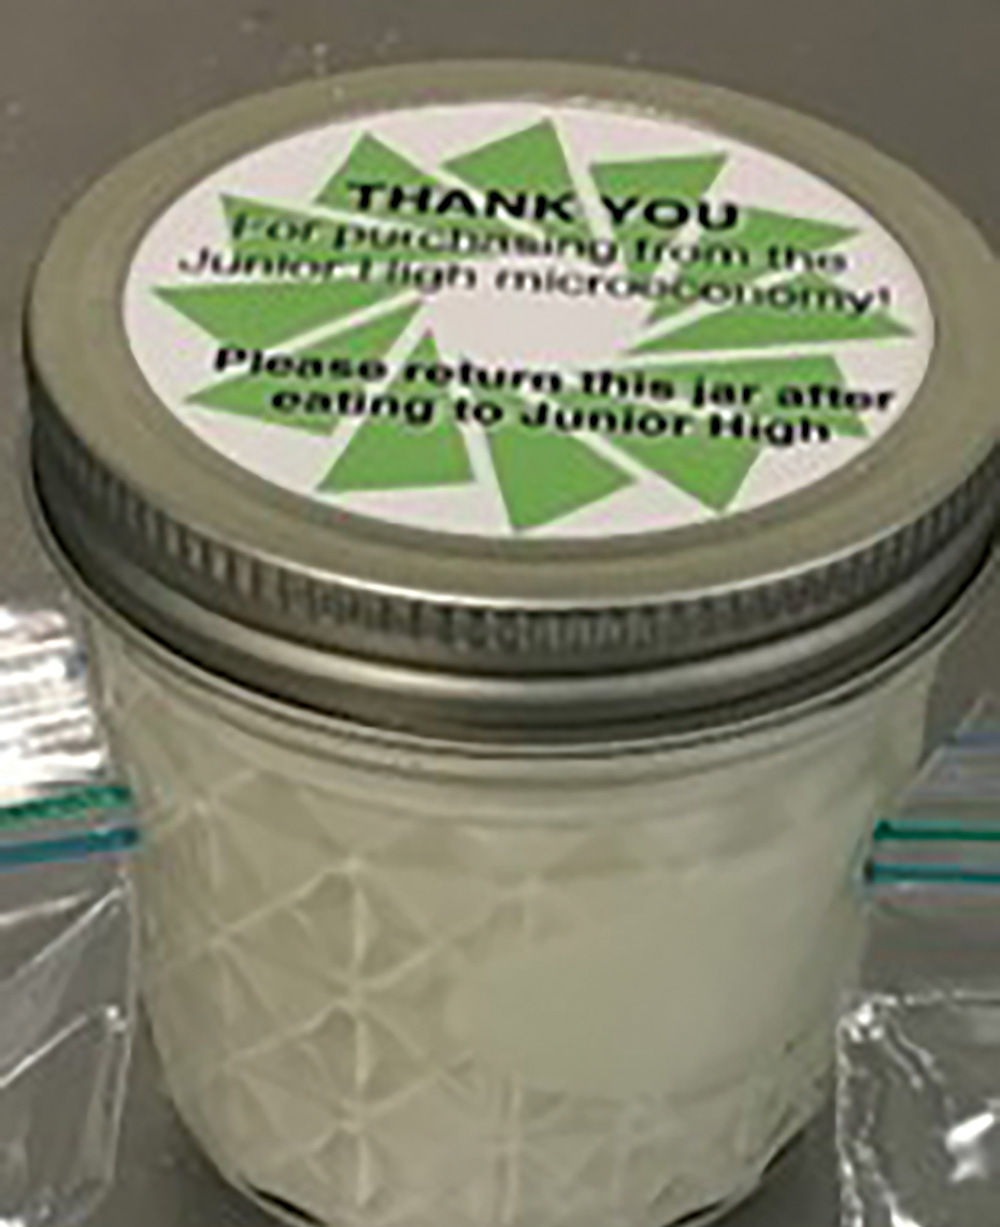 A jar of the final packaged and labelled yogurt product for sale.